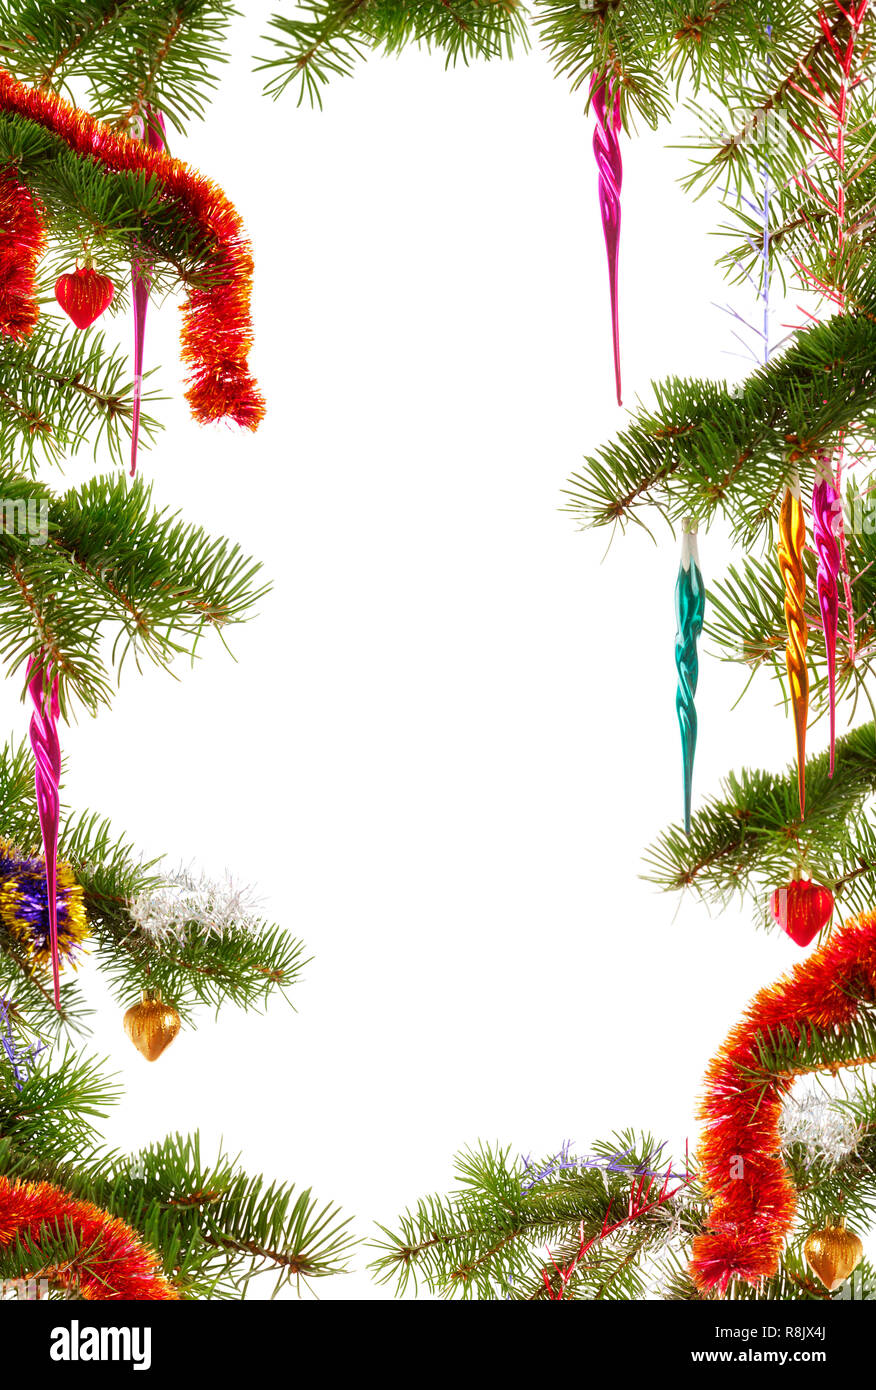 Colorful Christmas themed frame made from fir tree branches decorated with Christmas ornaments on white background Stock Photo